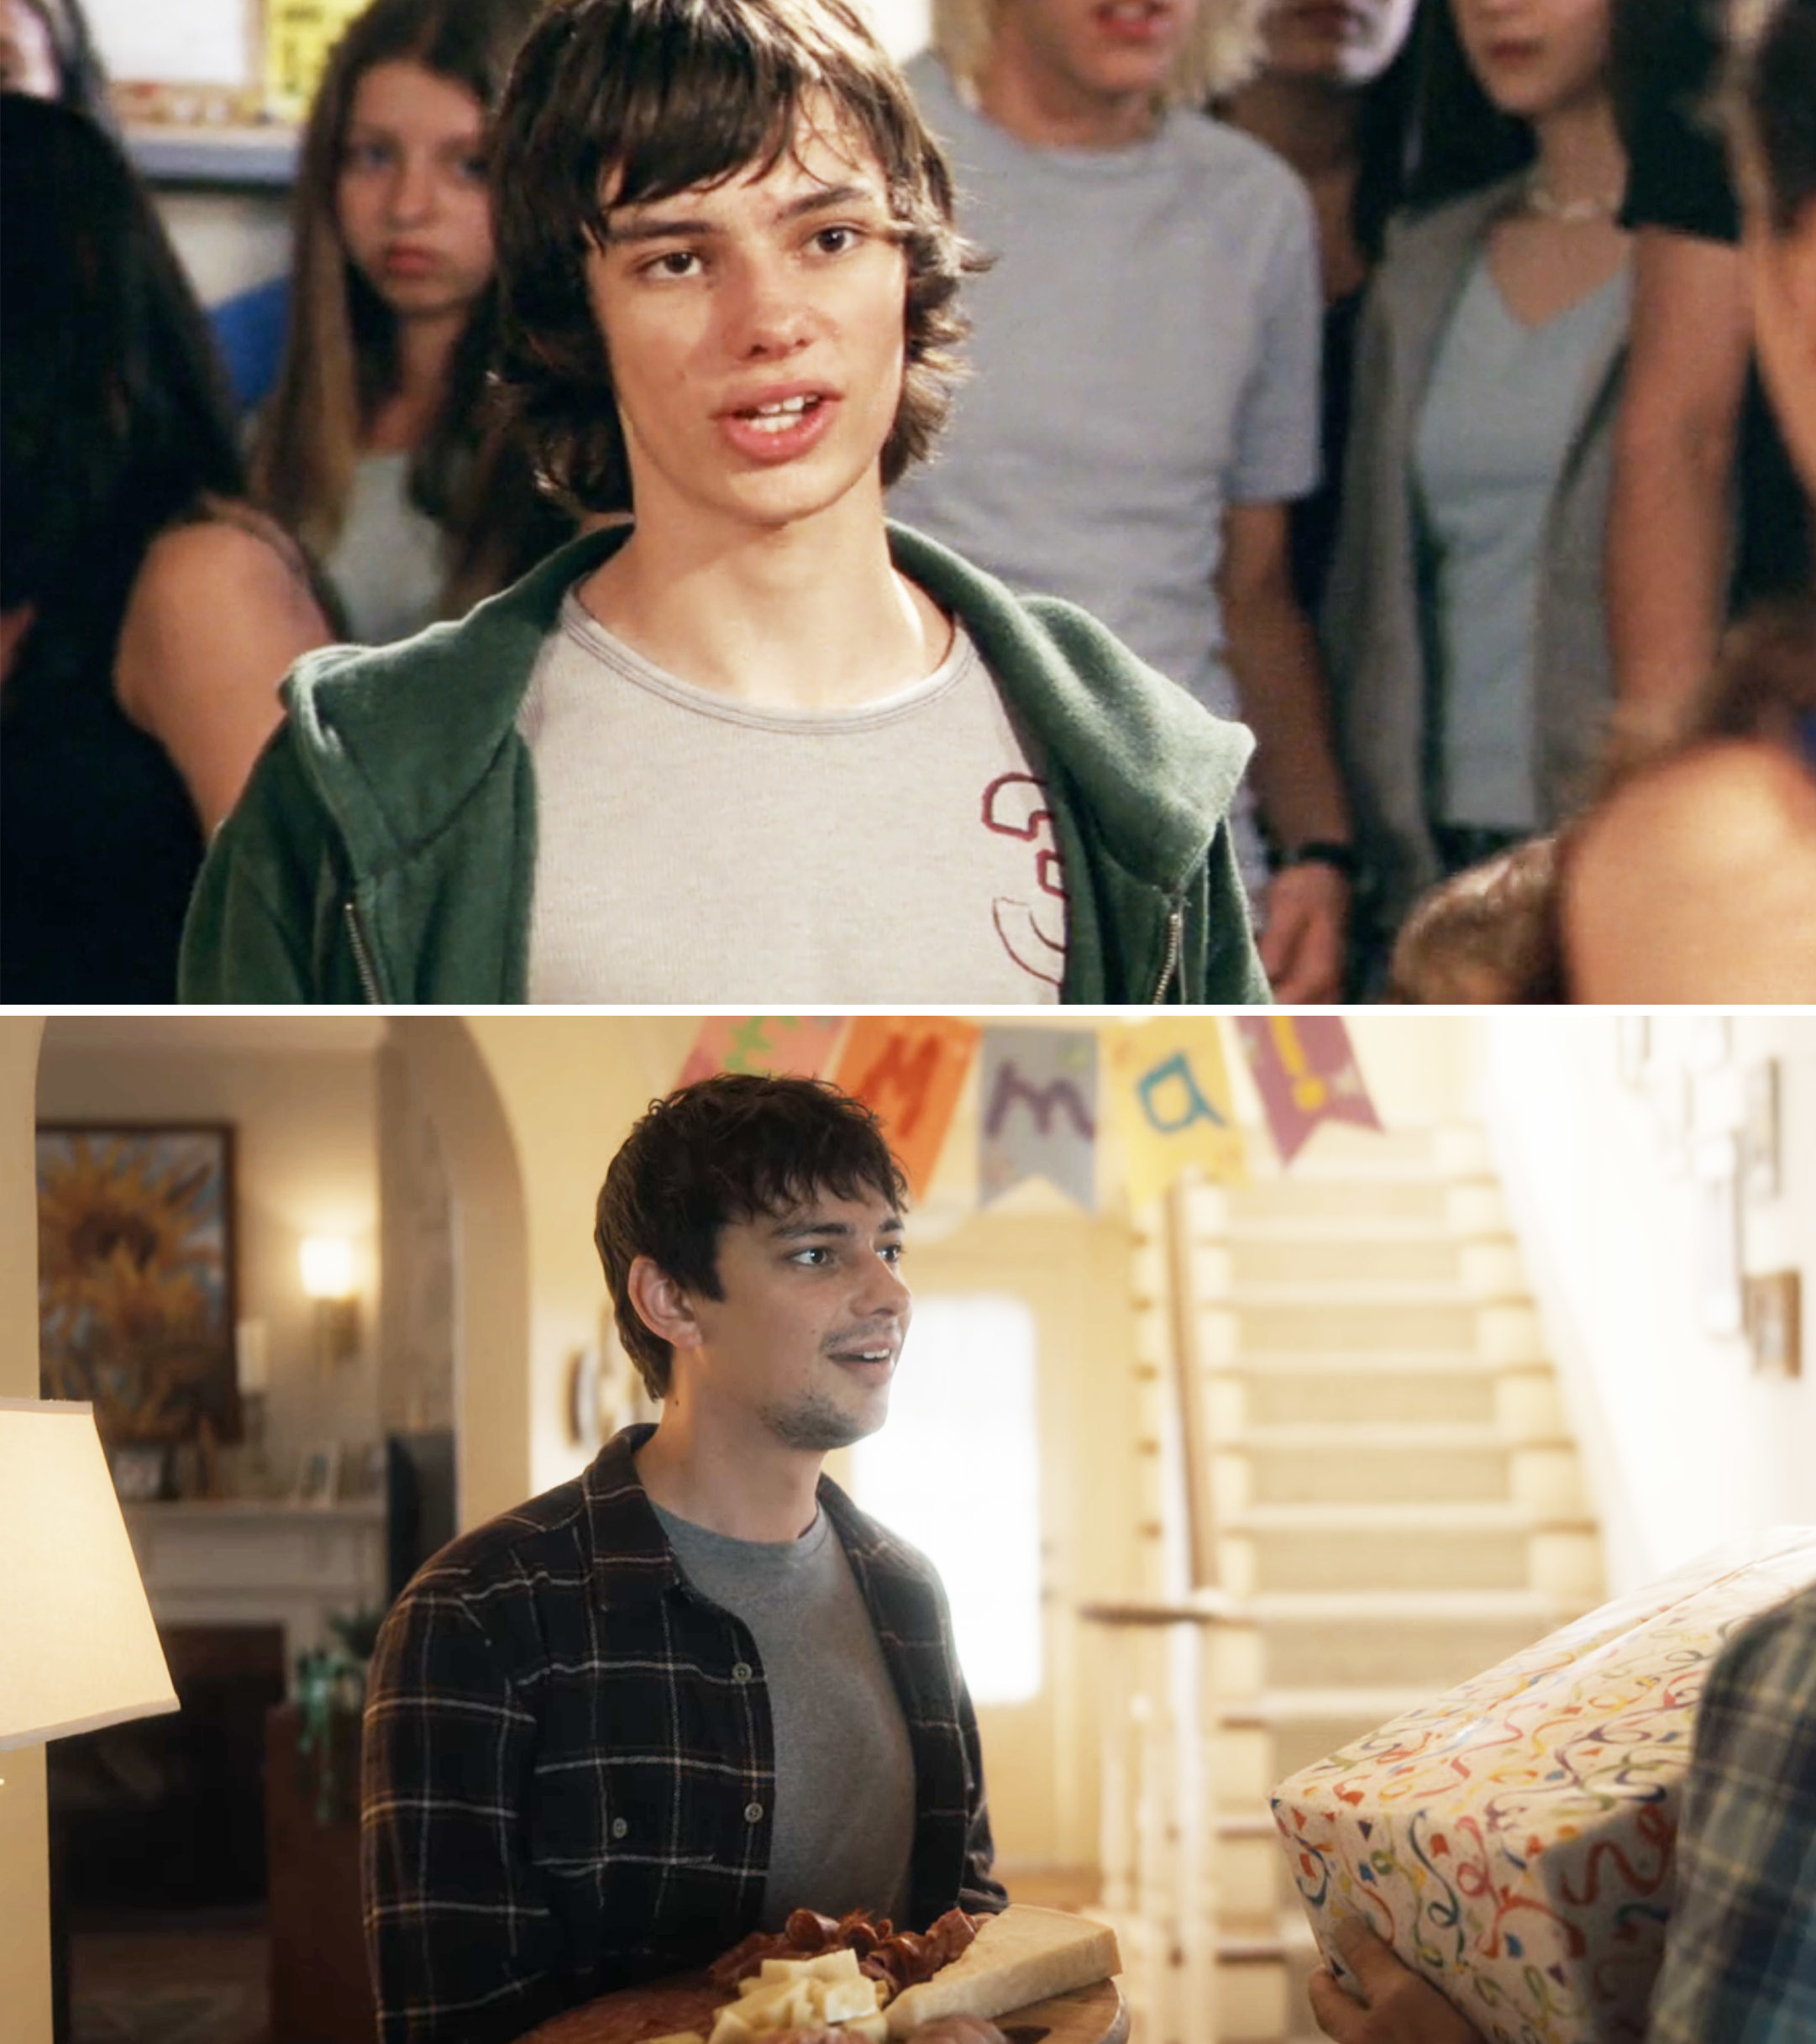 Devon in a scene from the movie and in a close-up at a media event